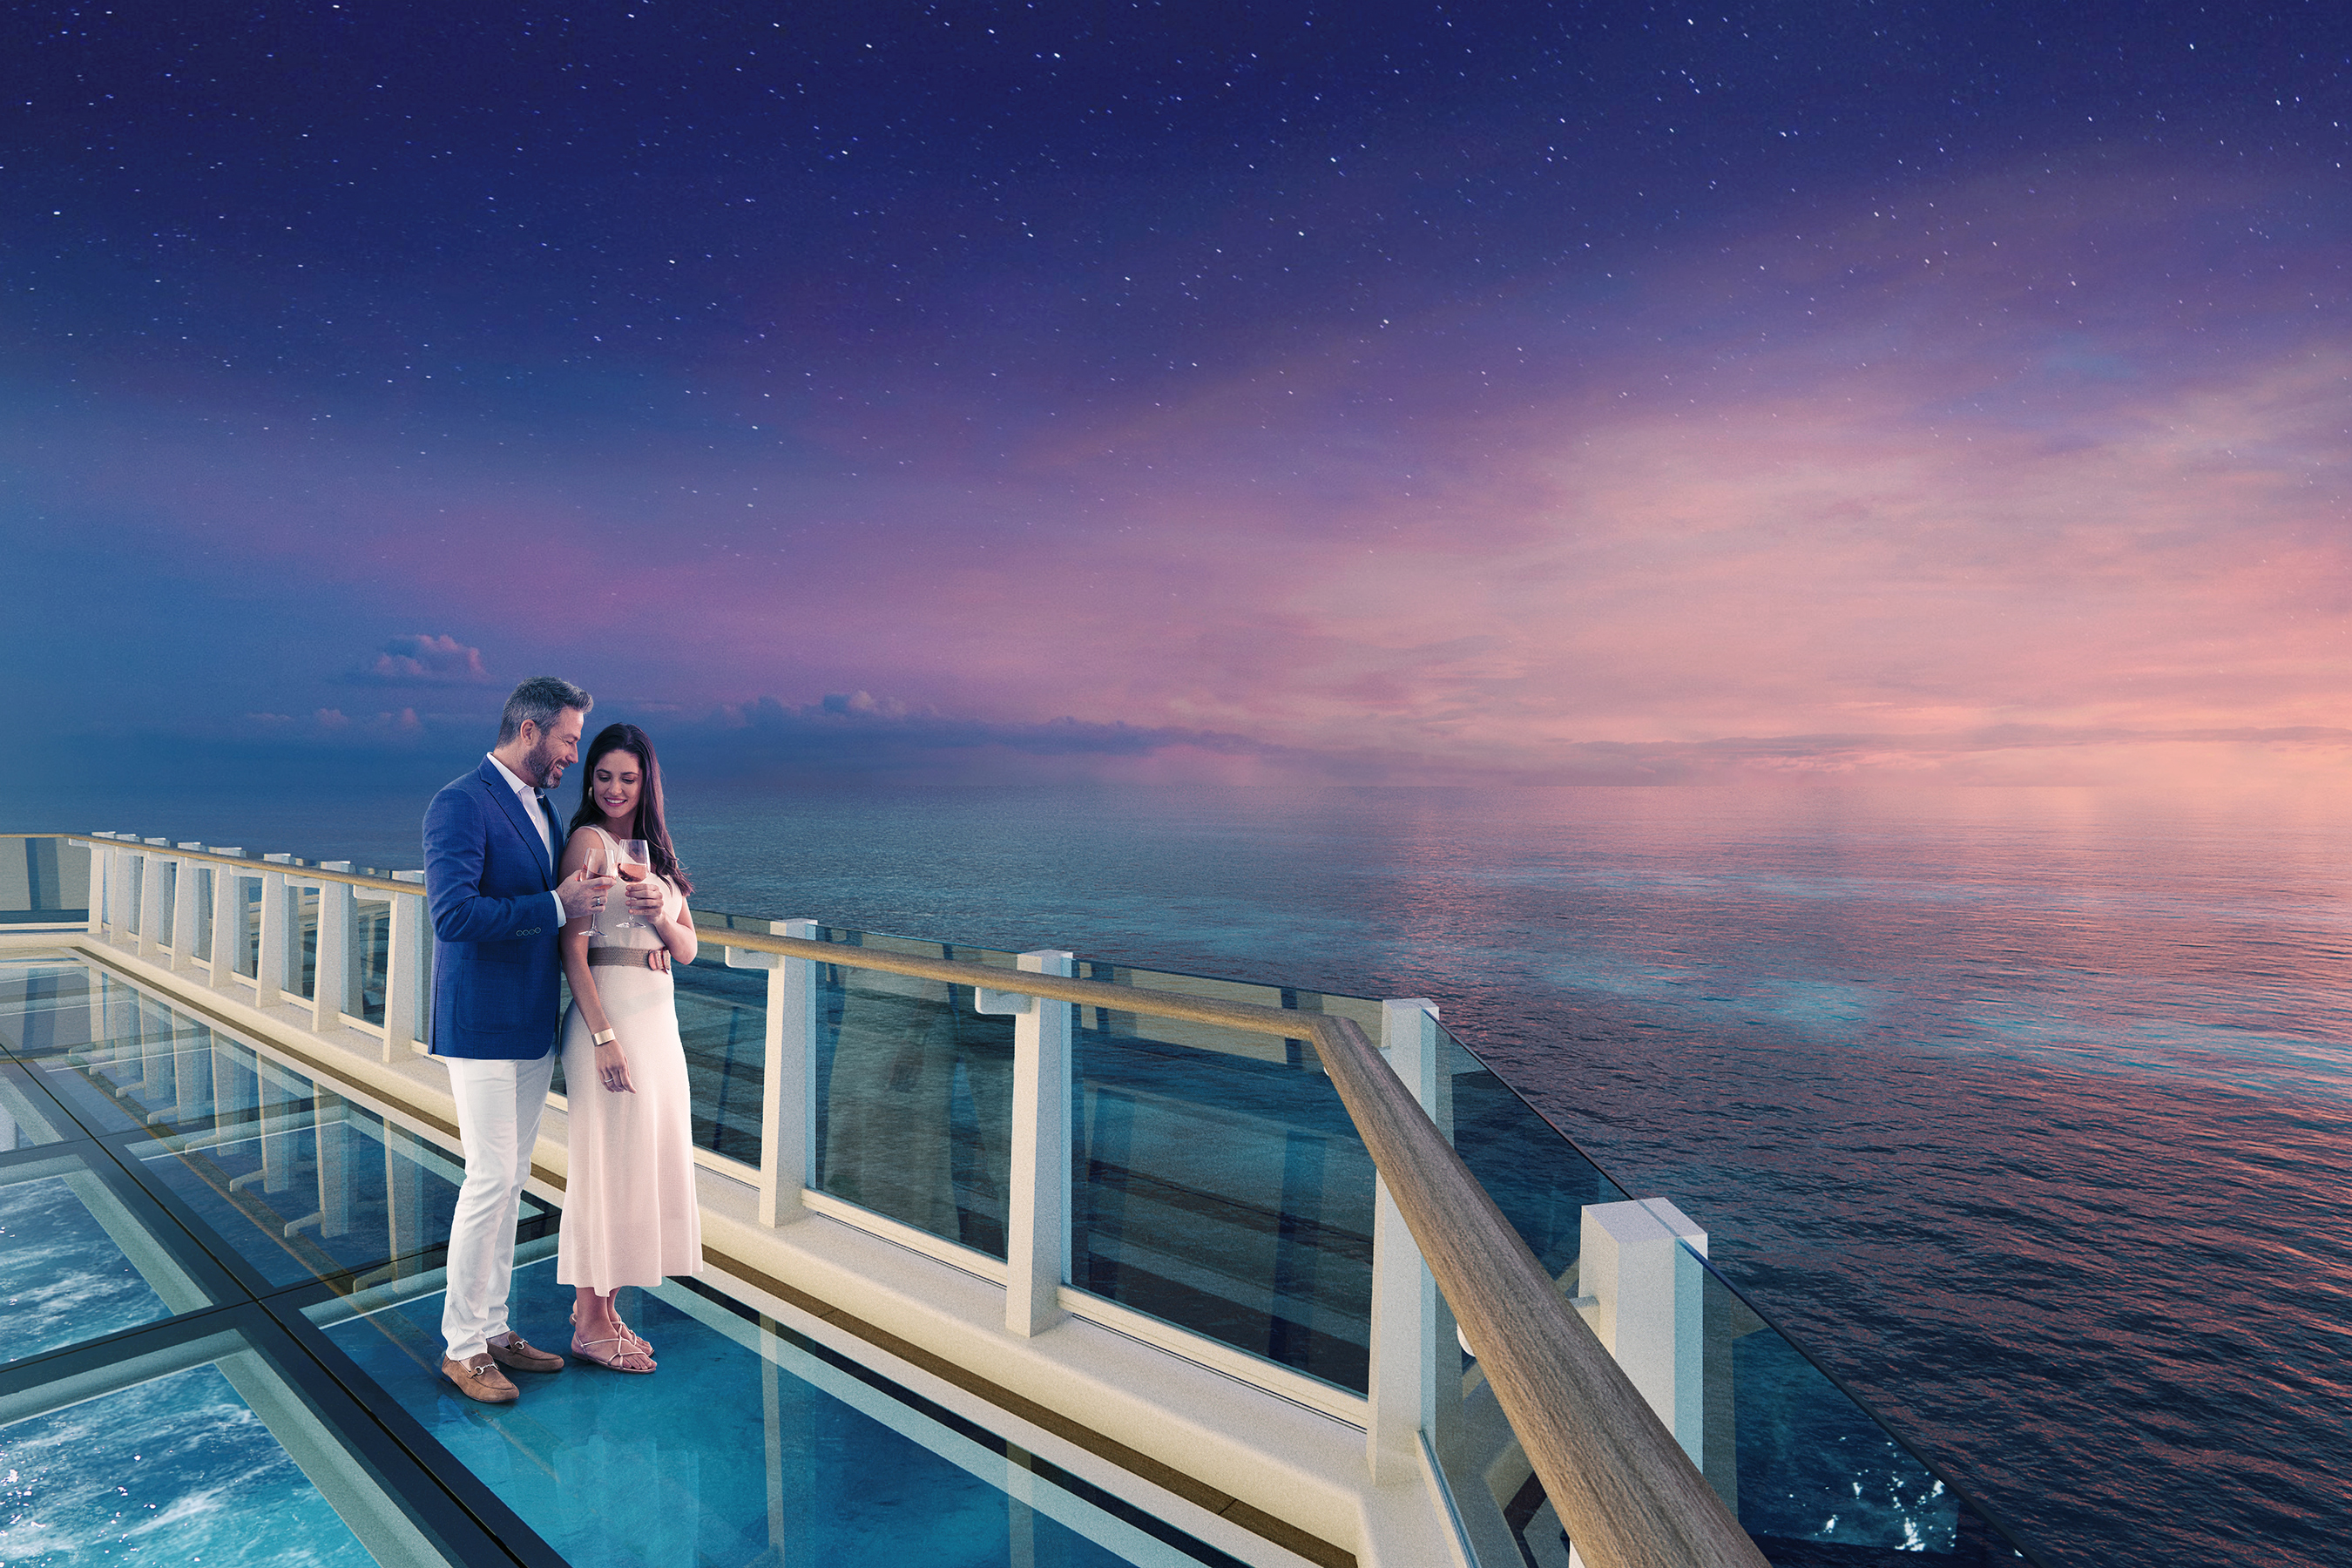 Norwegian Viva’s Ocean Boulevard, the 44,000 square foot outdoor walkway which wraps around the entire ship, will feature Oceanwalk, two glass bridges situated above water.